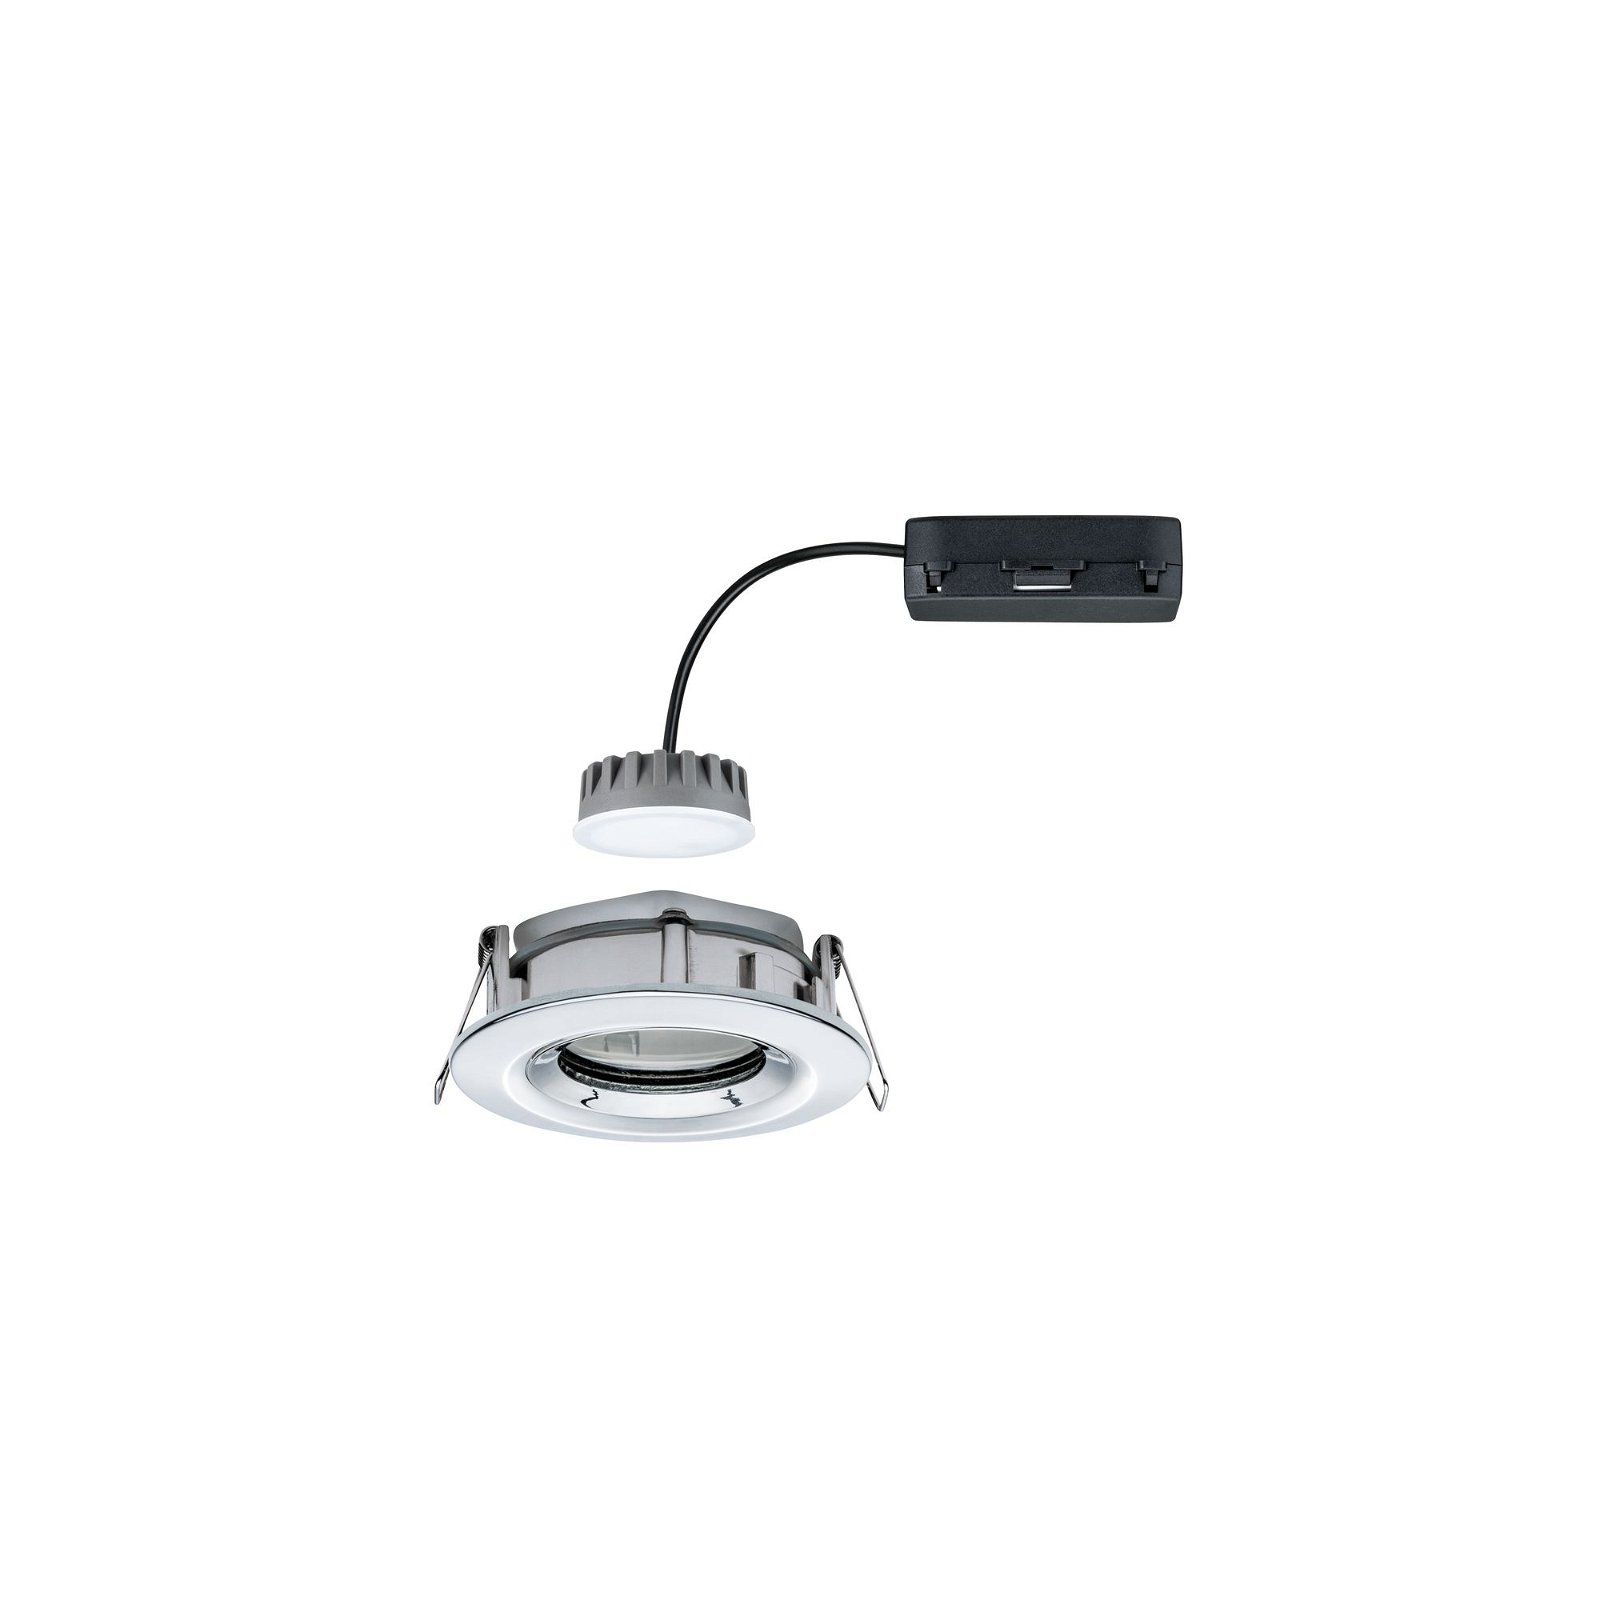 LED Recessed luminaire Nova Plus Coin Single luminaire Swivelling IP65 round 93mm 30° Coin 6W 470lm 230V dimmable 2700K Chrome